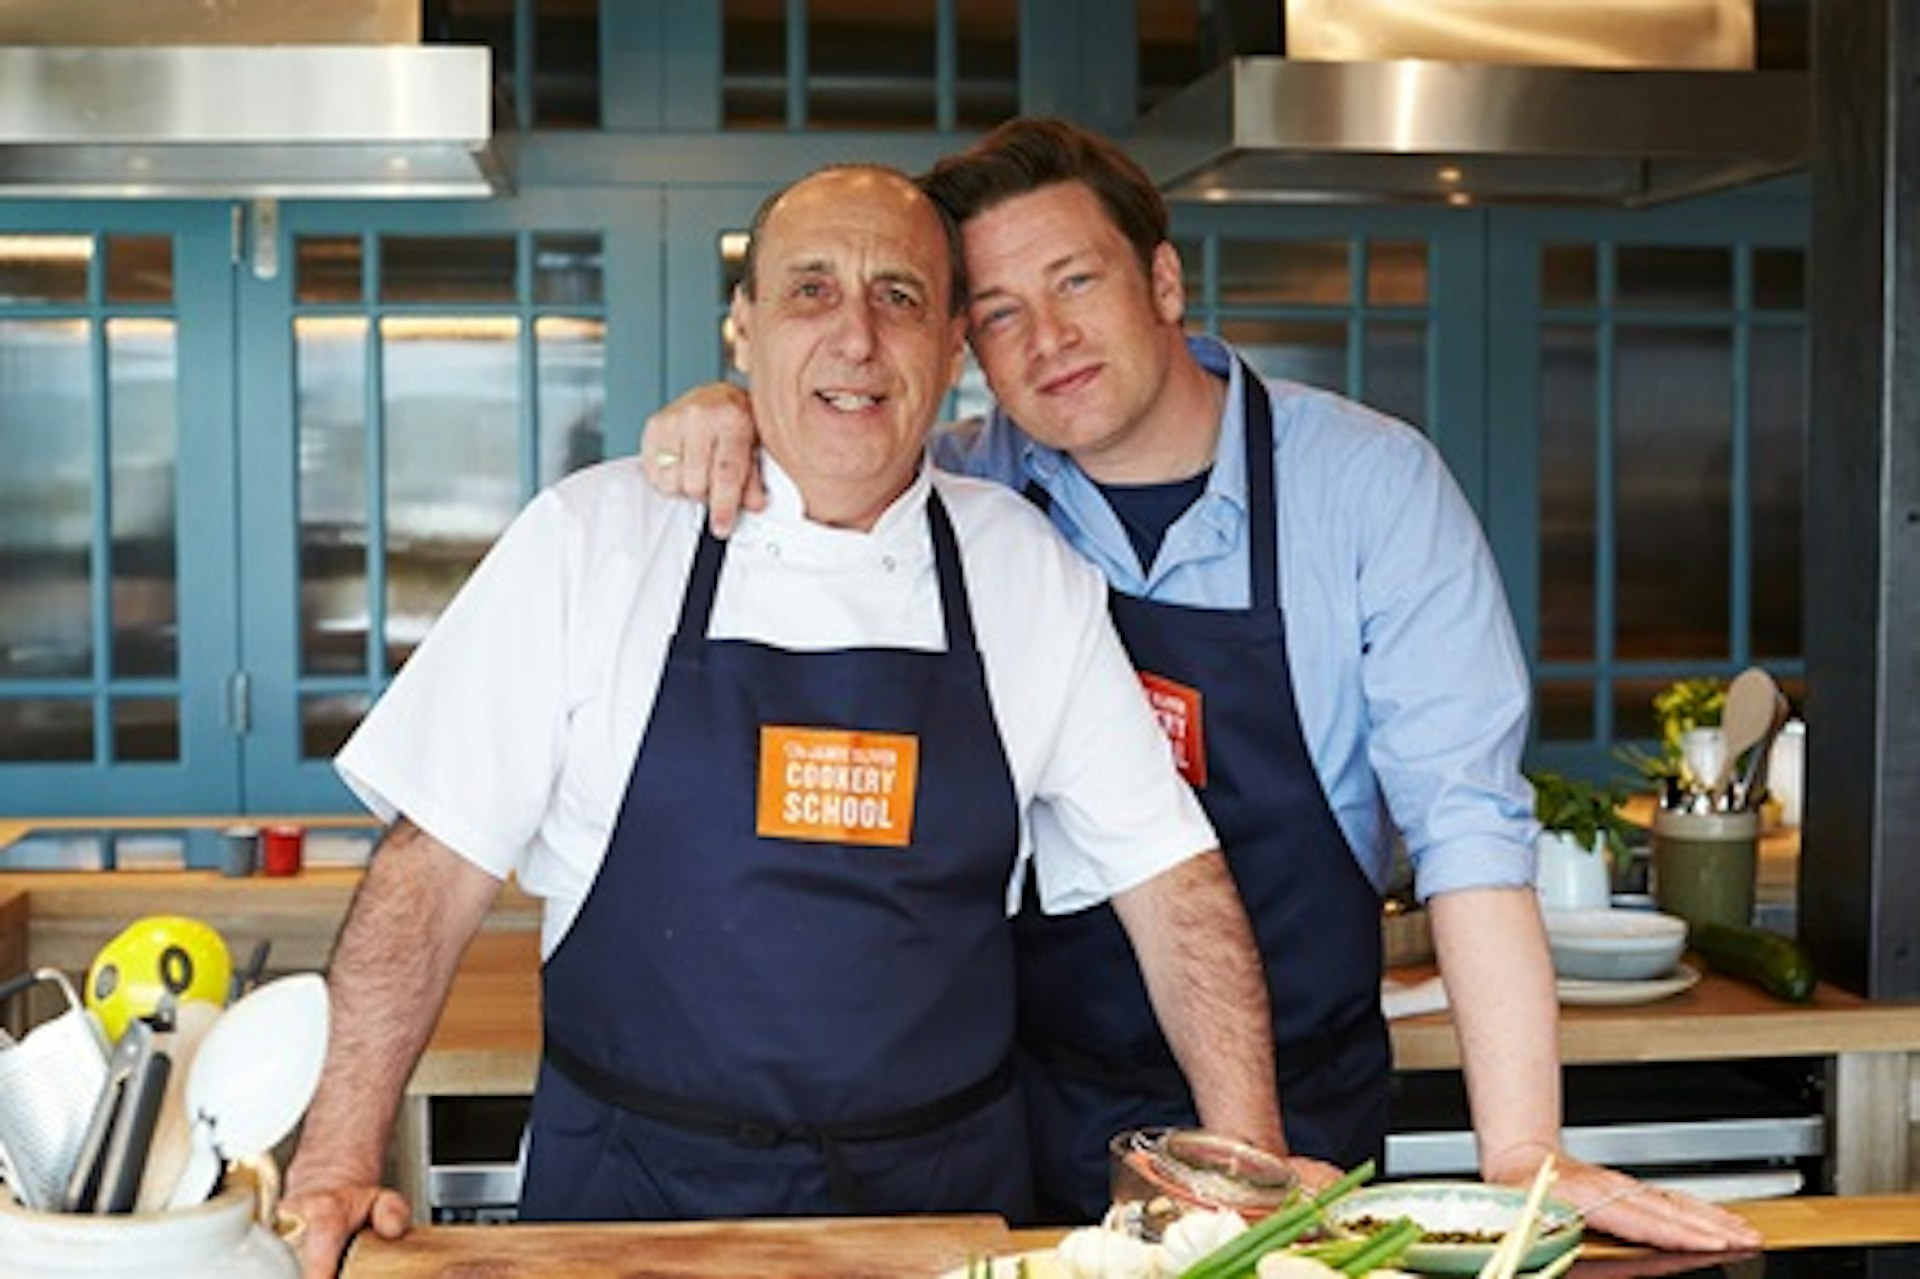 Sharpen Your Knife Skills: The Essentials Class at The Jamie Oliver Cookery School 2